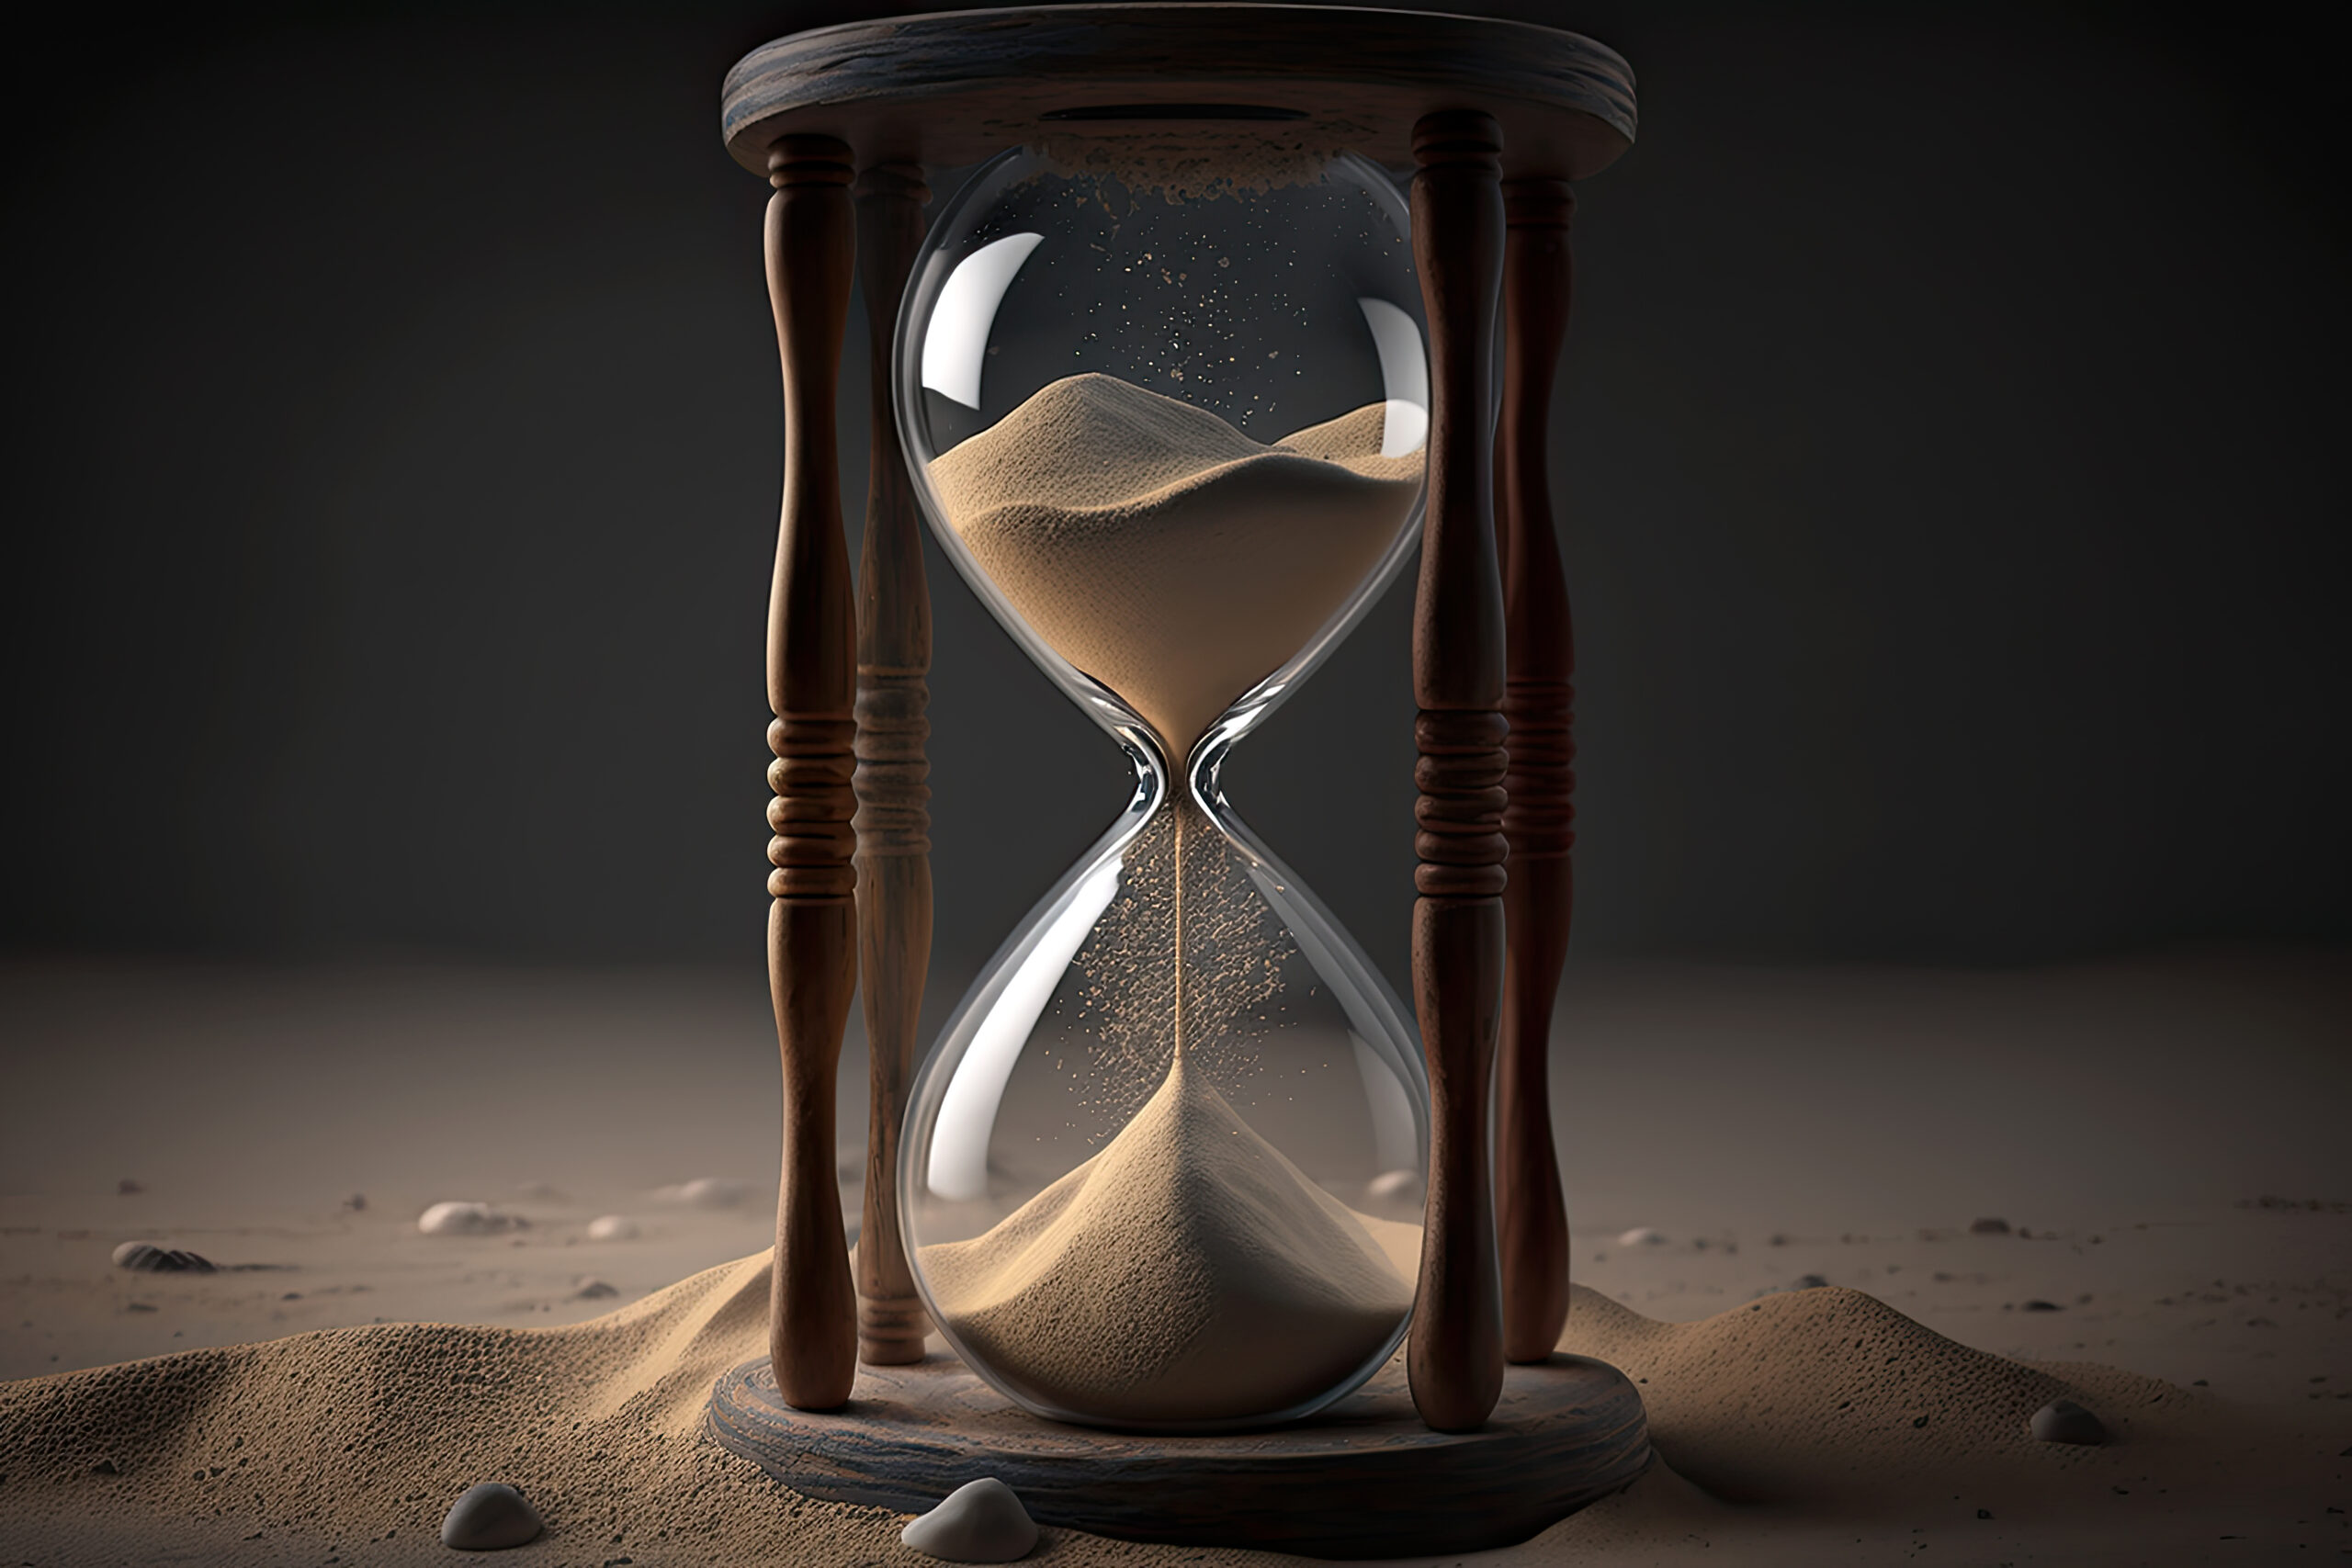 Hourglass shows time